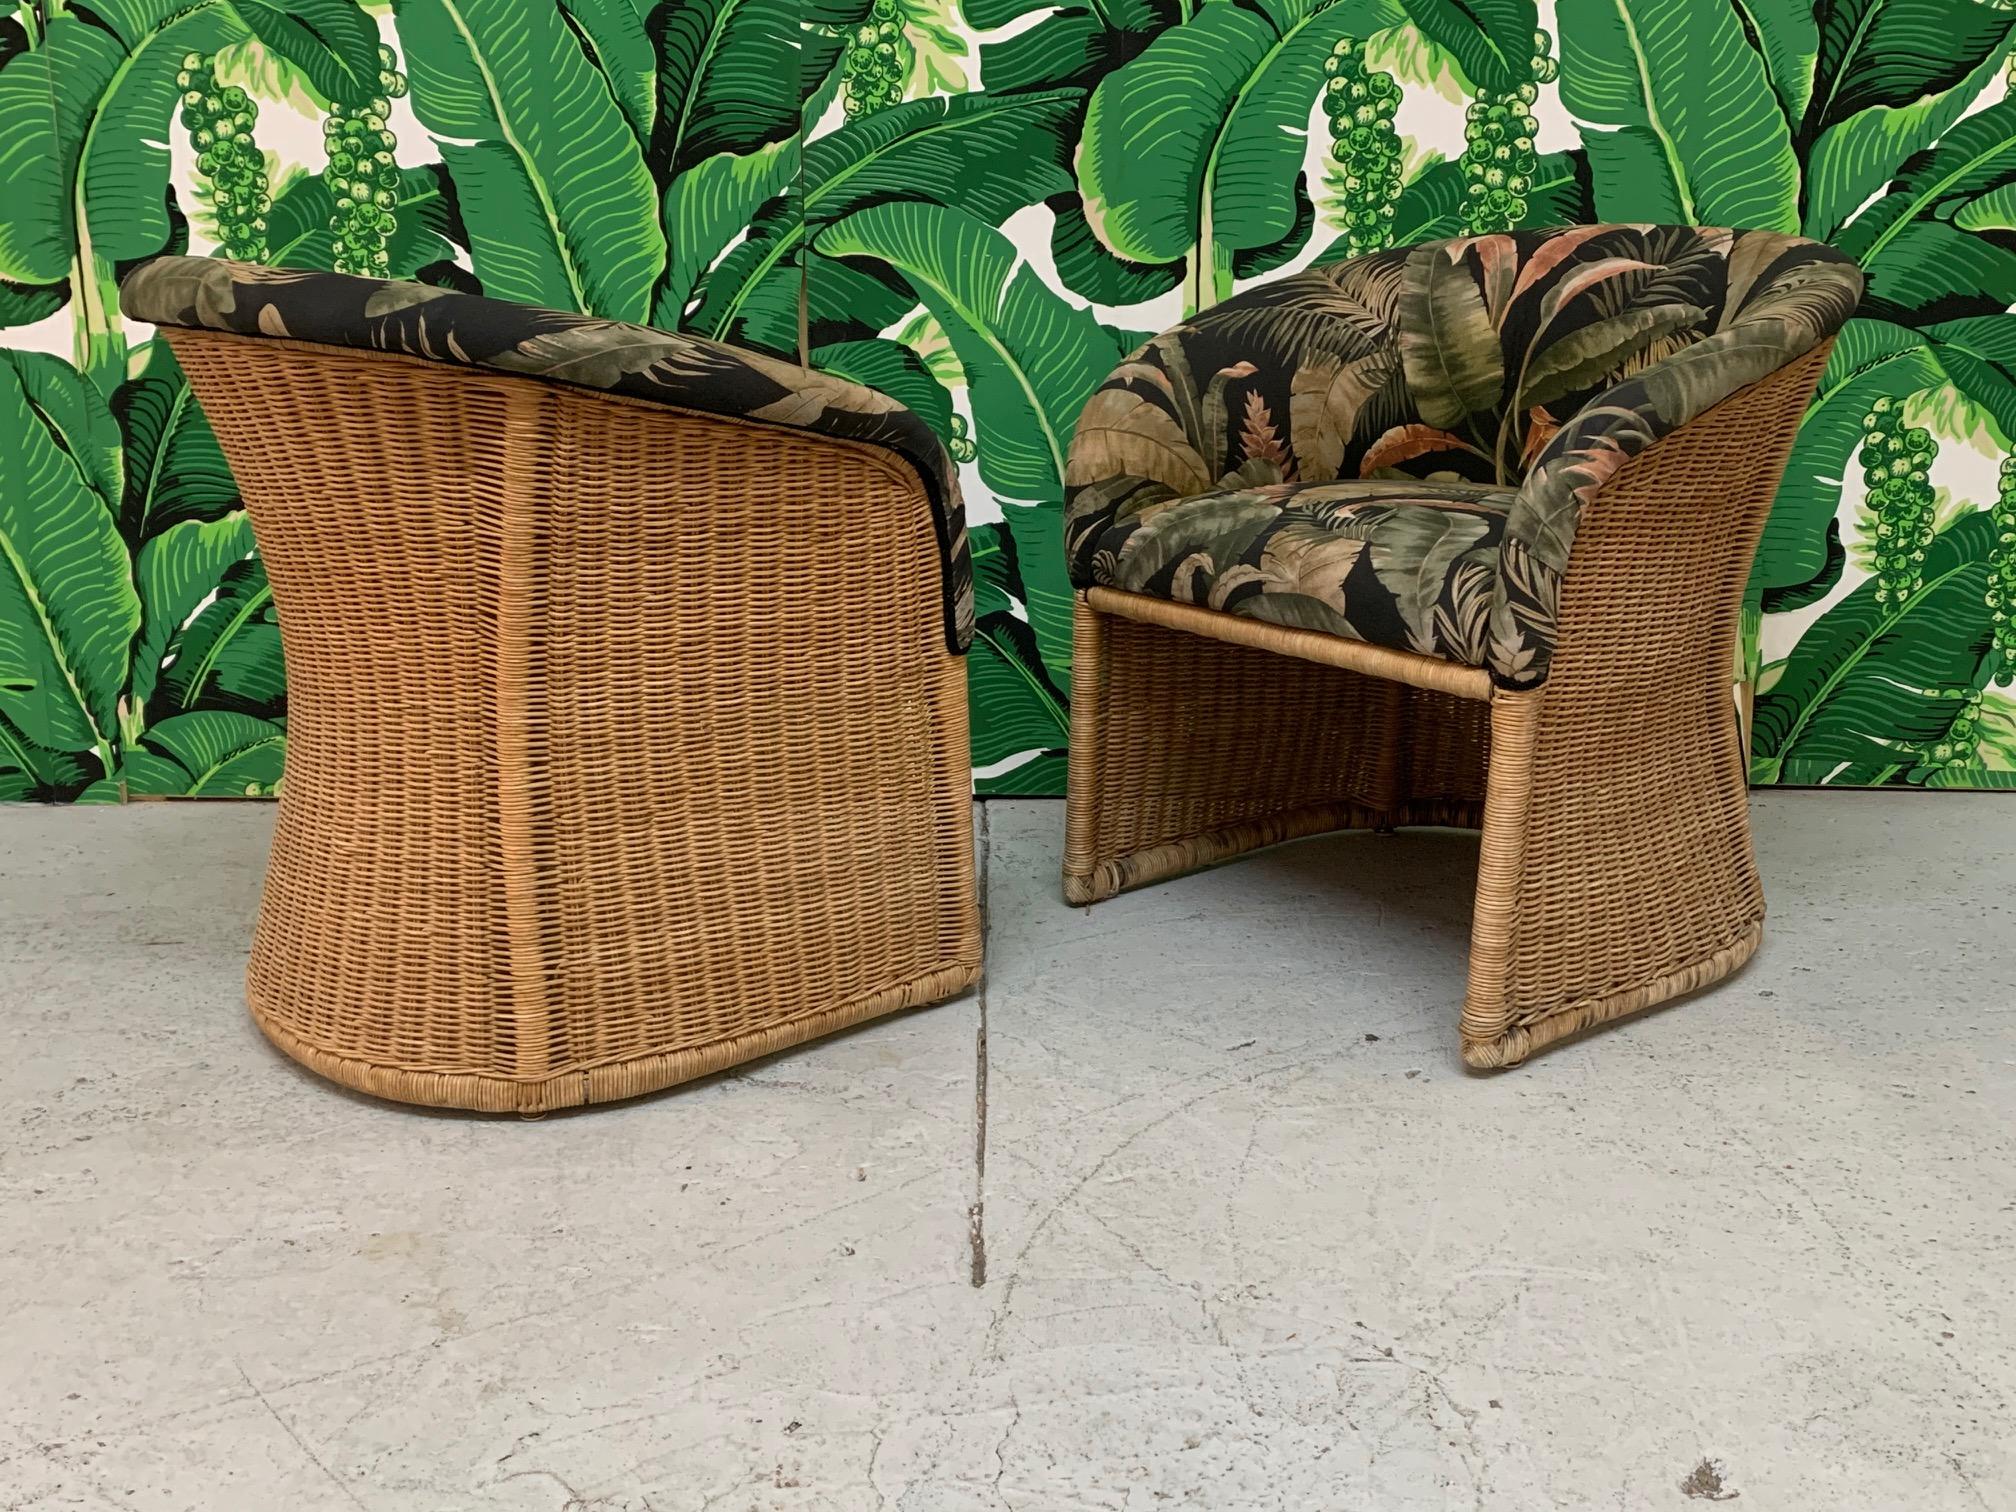 Pair of wicker club chairs feature sculptural design and tropical palm leaf print upholstery. Good vintage condition with minor imperfections consistent with age. Price is for the pair. 
Measures: Seat height is 19